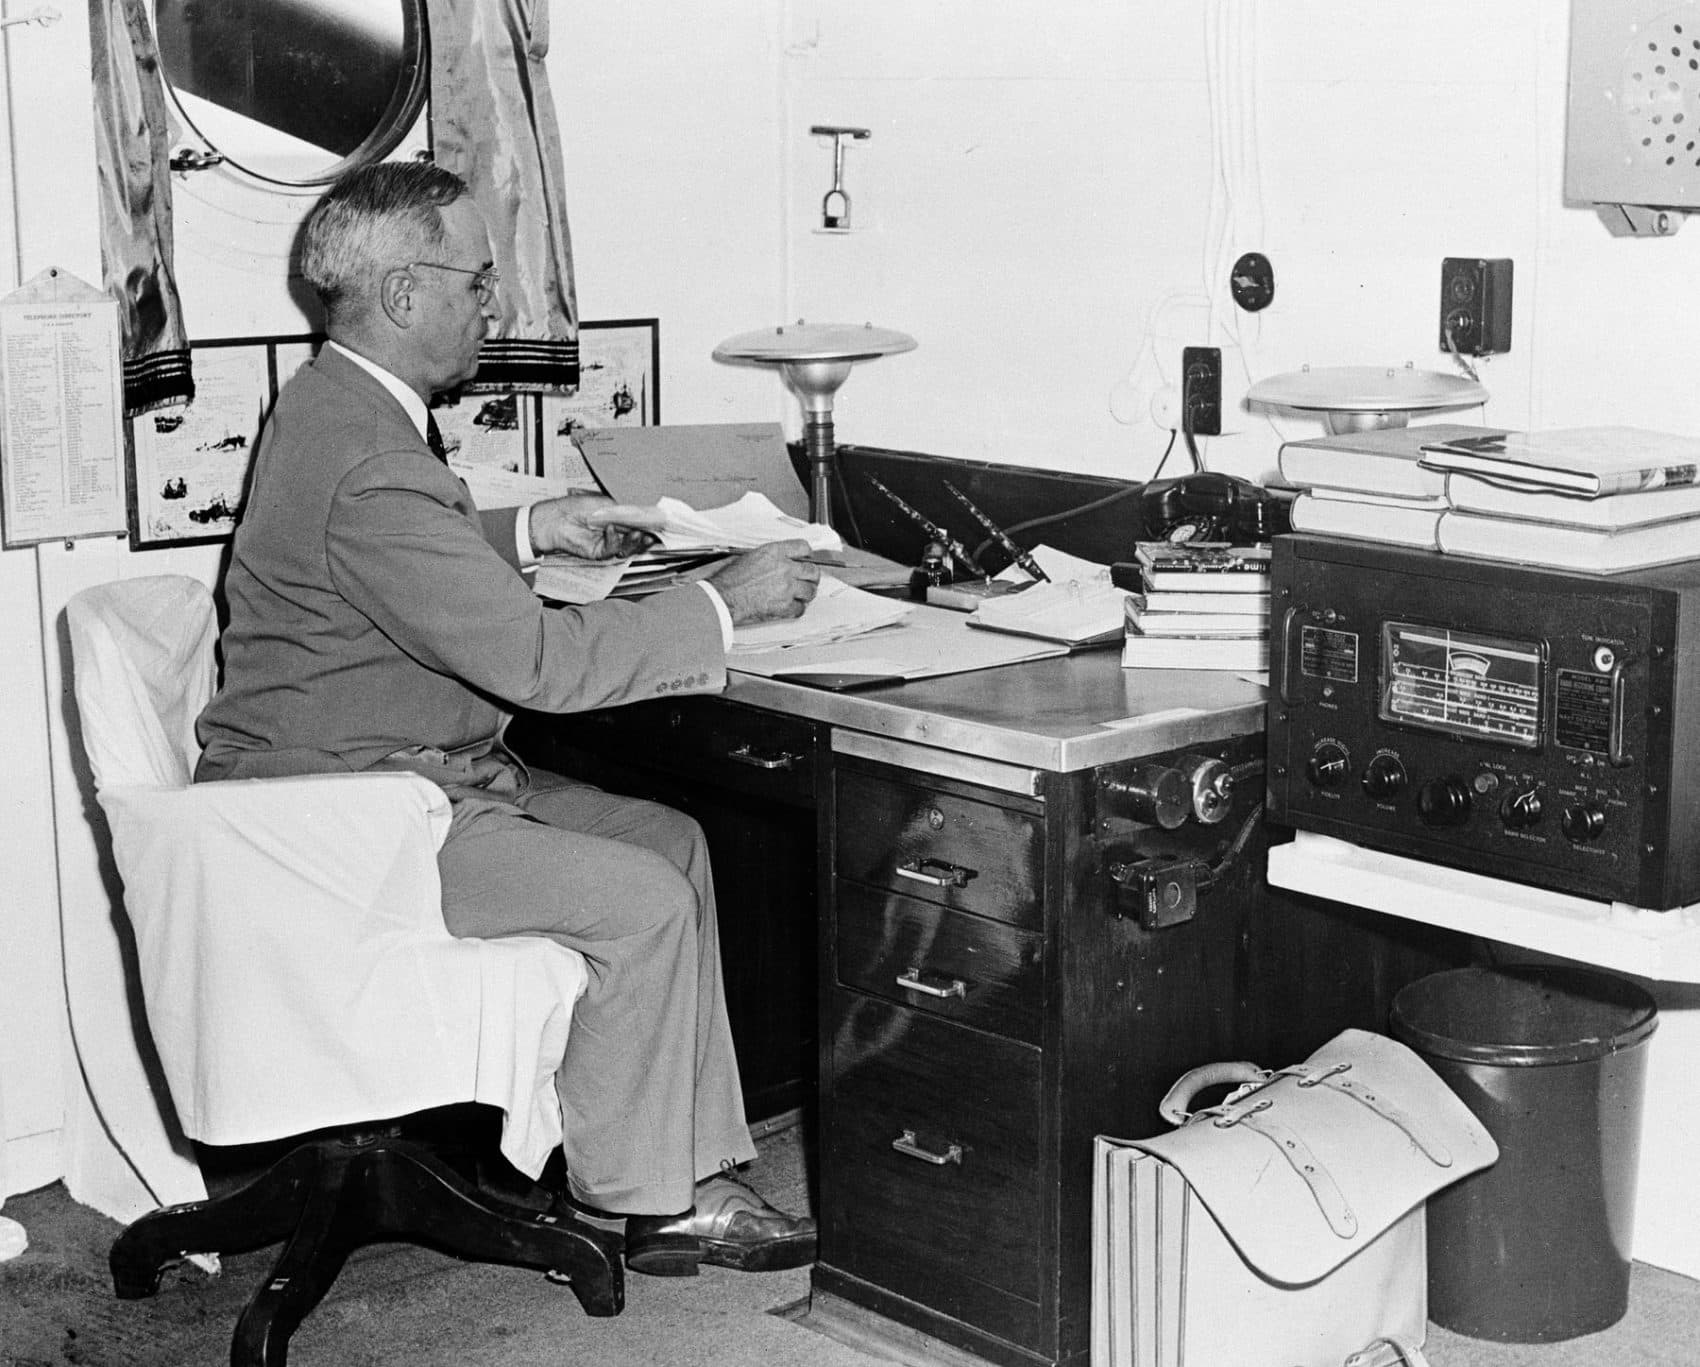 Aboard the cruiser Augusta, President Harry S. Truman, with a radio at hand, reads reports of the first atomic bomb raid on Japan, Aug. 6, 1945, while en route home from the Potsdam conference, where the Japanese flatly rejected the Potsdam Declaration. (AP Photo)